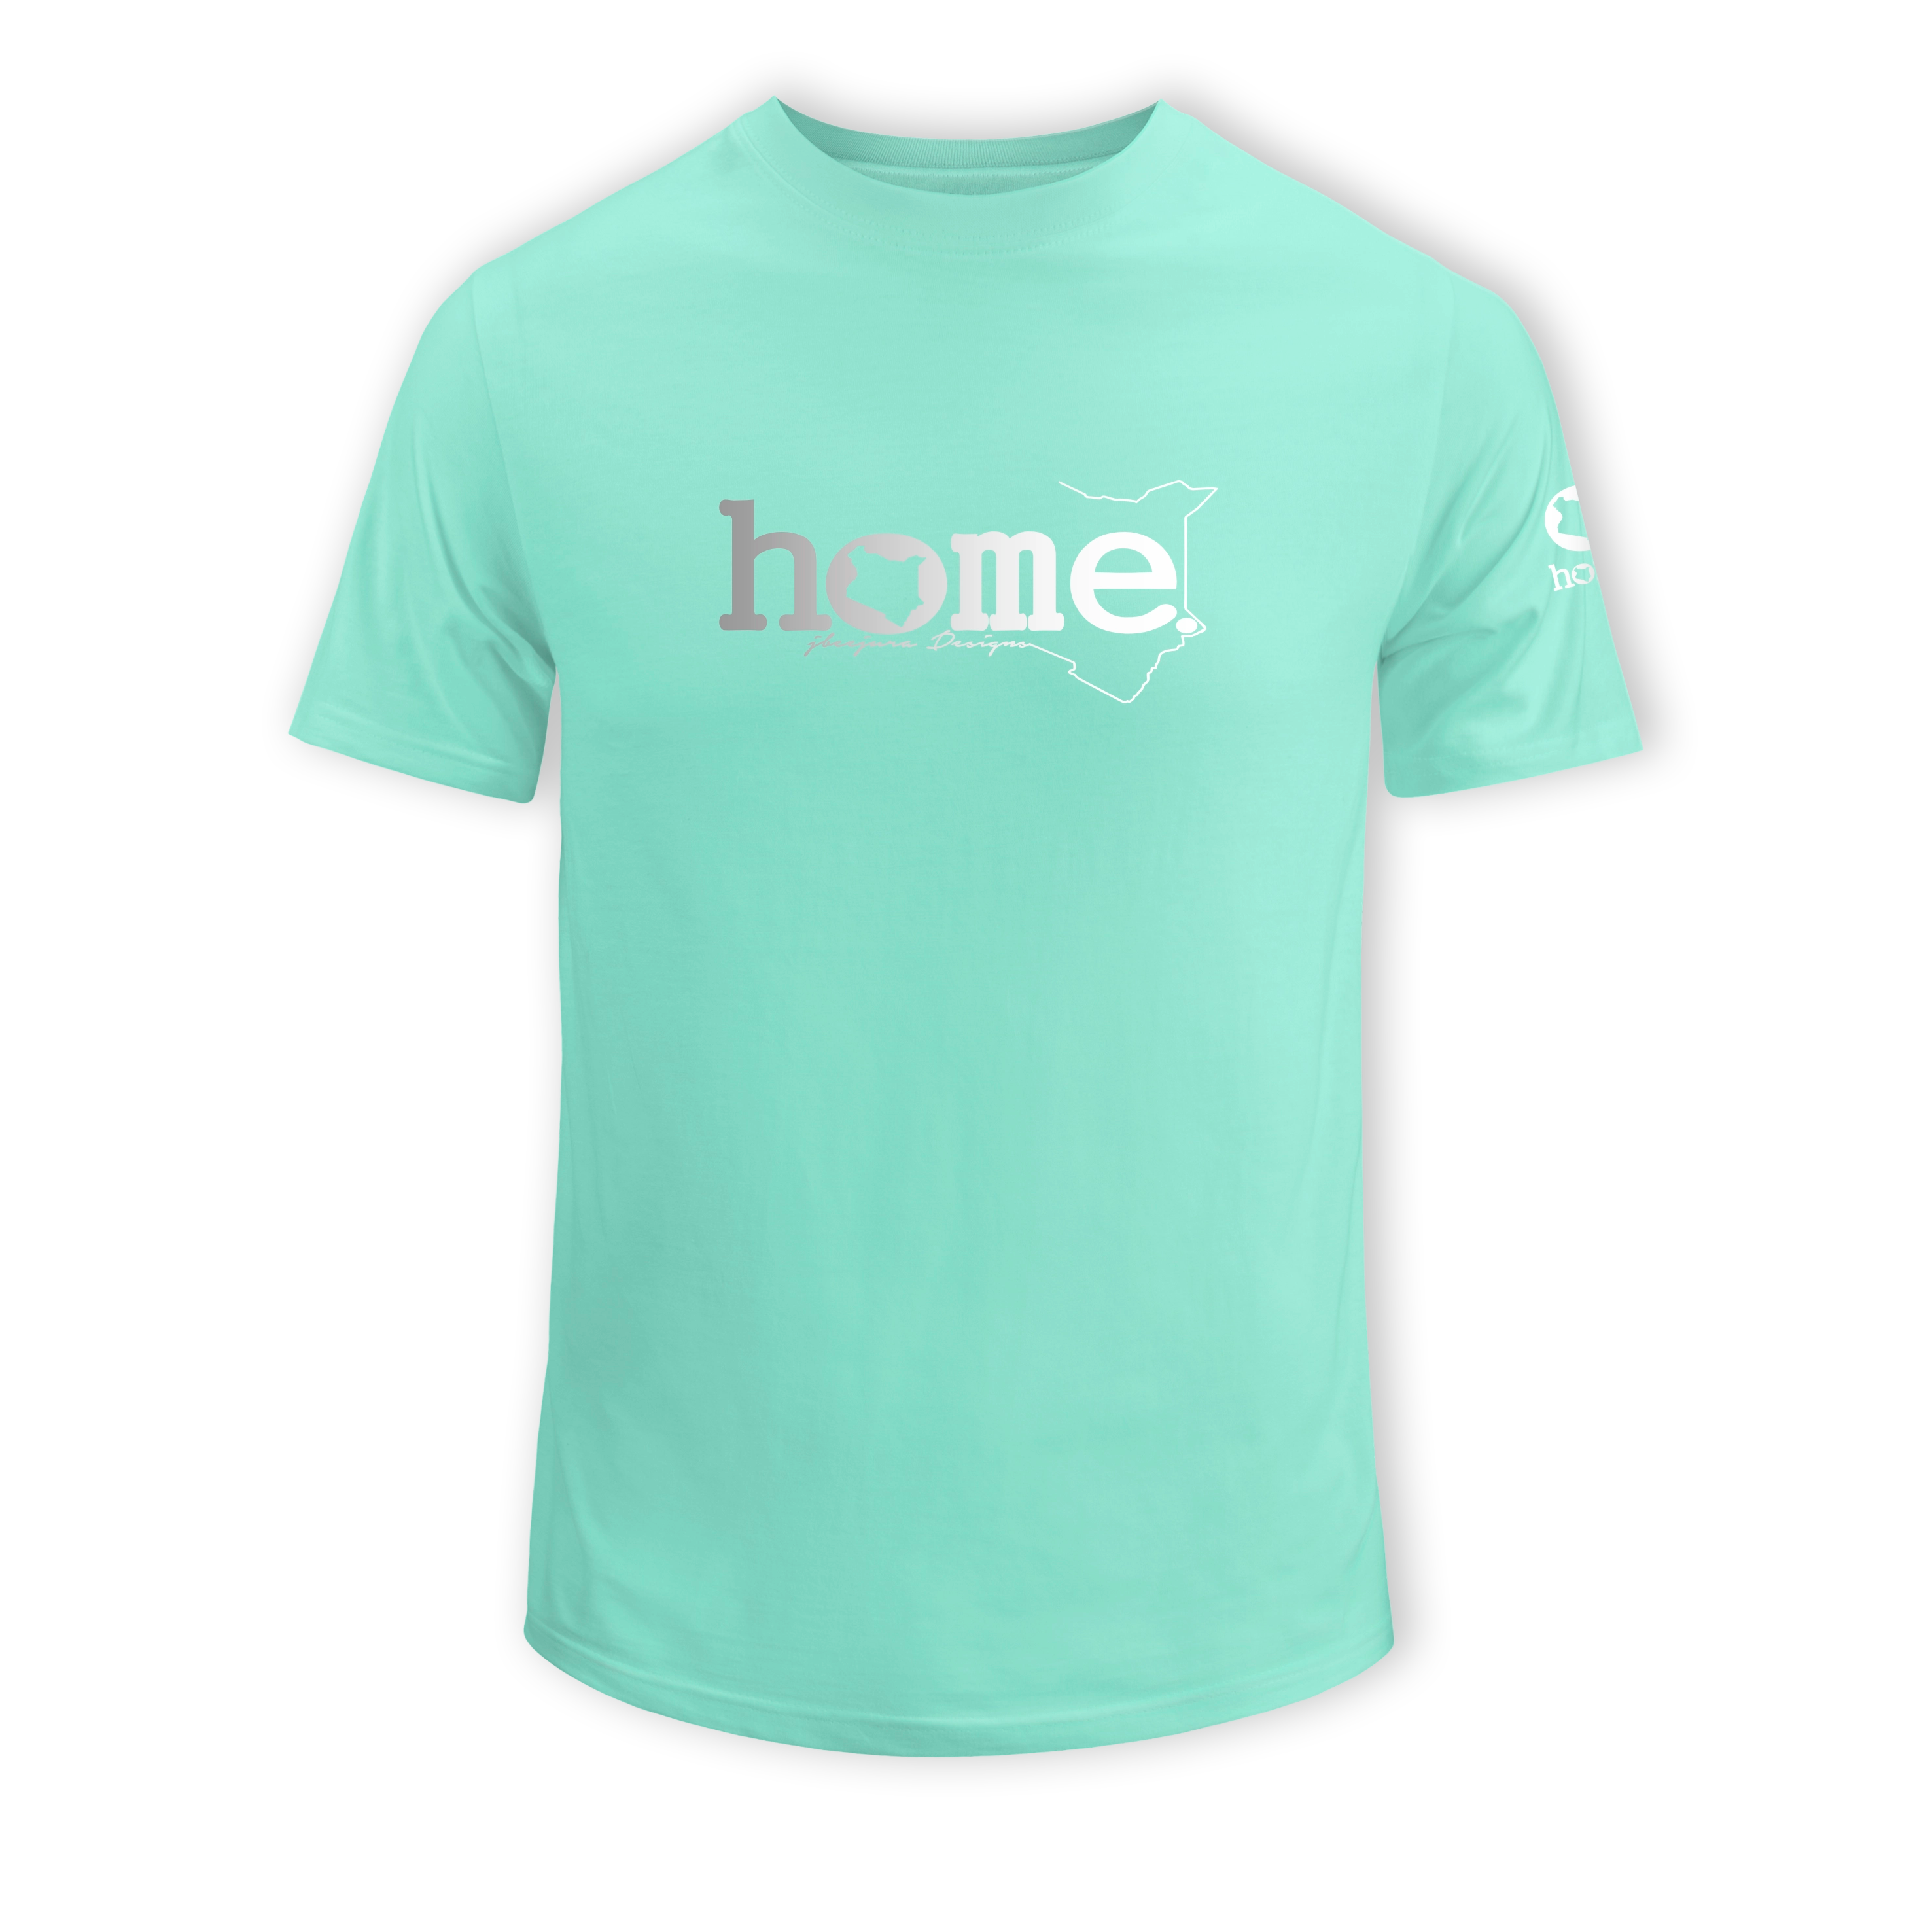 home_254 SHORT-SLEEVED TURQUOISE GREEN T-SHIRT WITH A SILVER CLASSIC WORDS PRINT – COTTON PLUS FABRIC